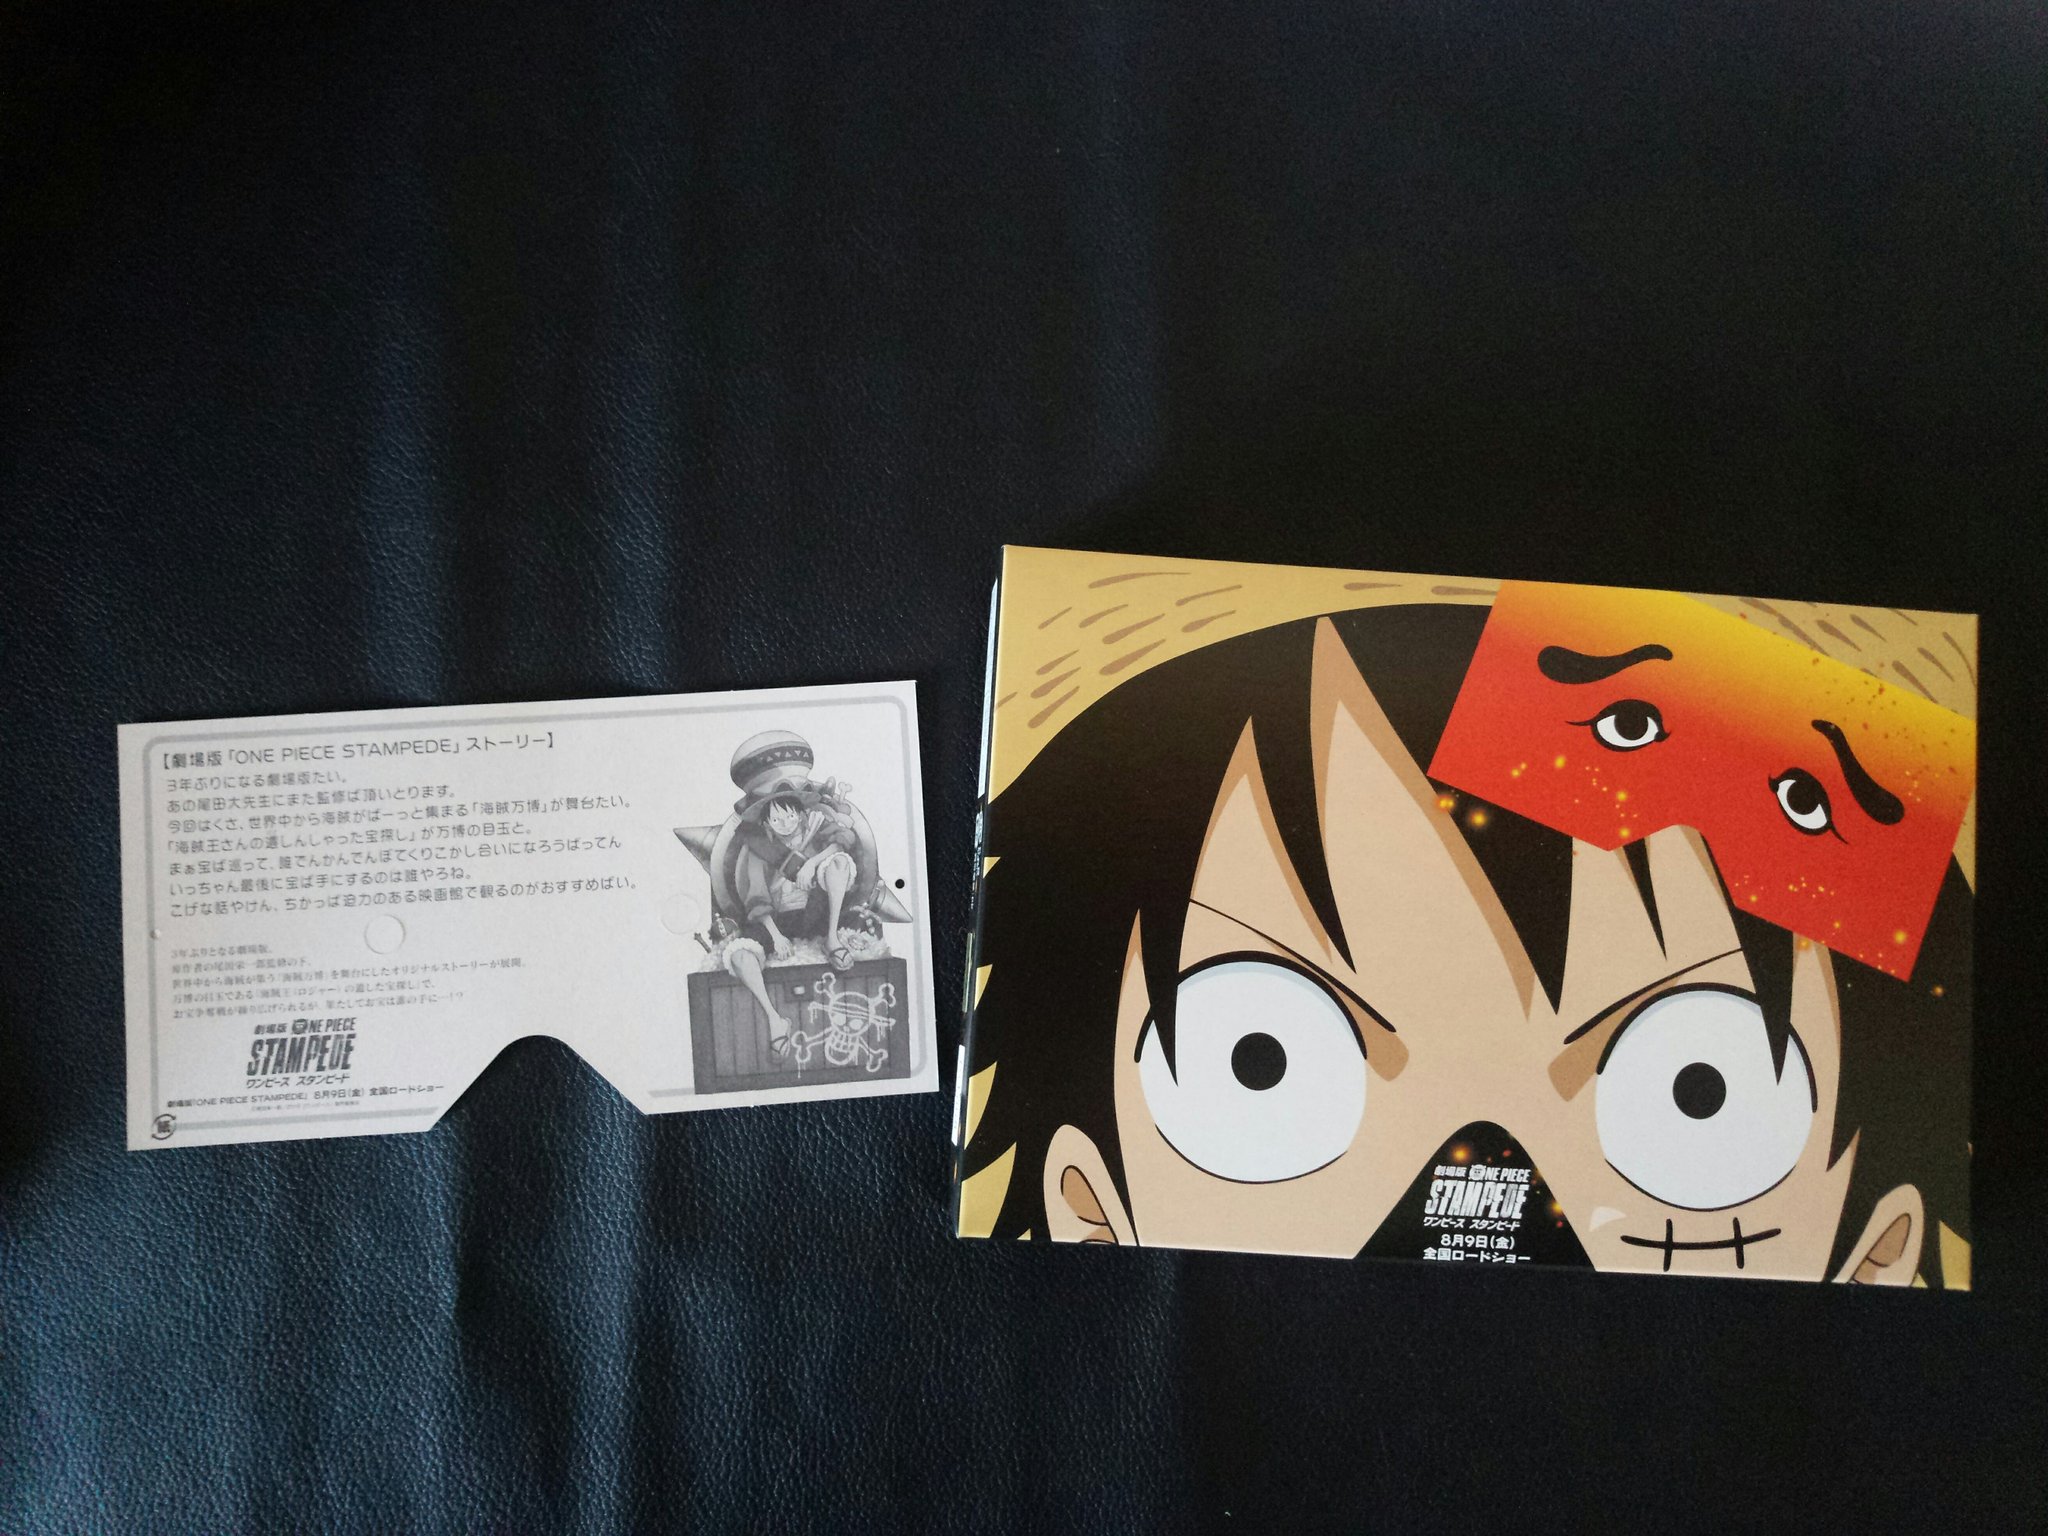 One Piece World Kumamoto Japan 福岡のスタンピード版ニ 加煎餅をやっと食しました 全10種あるらしいですが今回はこの5種 This Is A Stamped Ver Of Fukuoka S Niwakasenpei Illust Is Cute With Sweet Baked ワンピース 尾田栄一郎 Onepiece